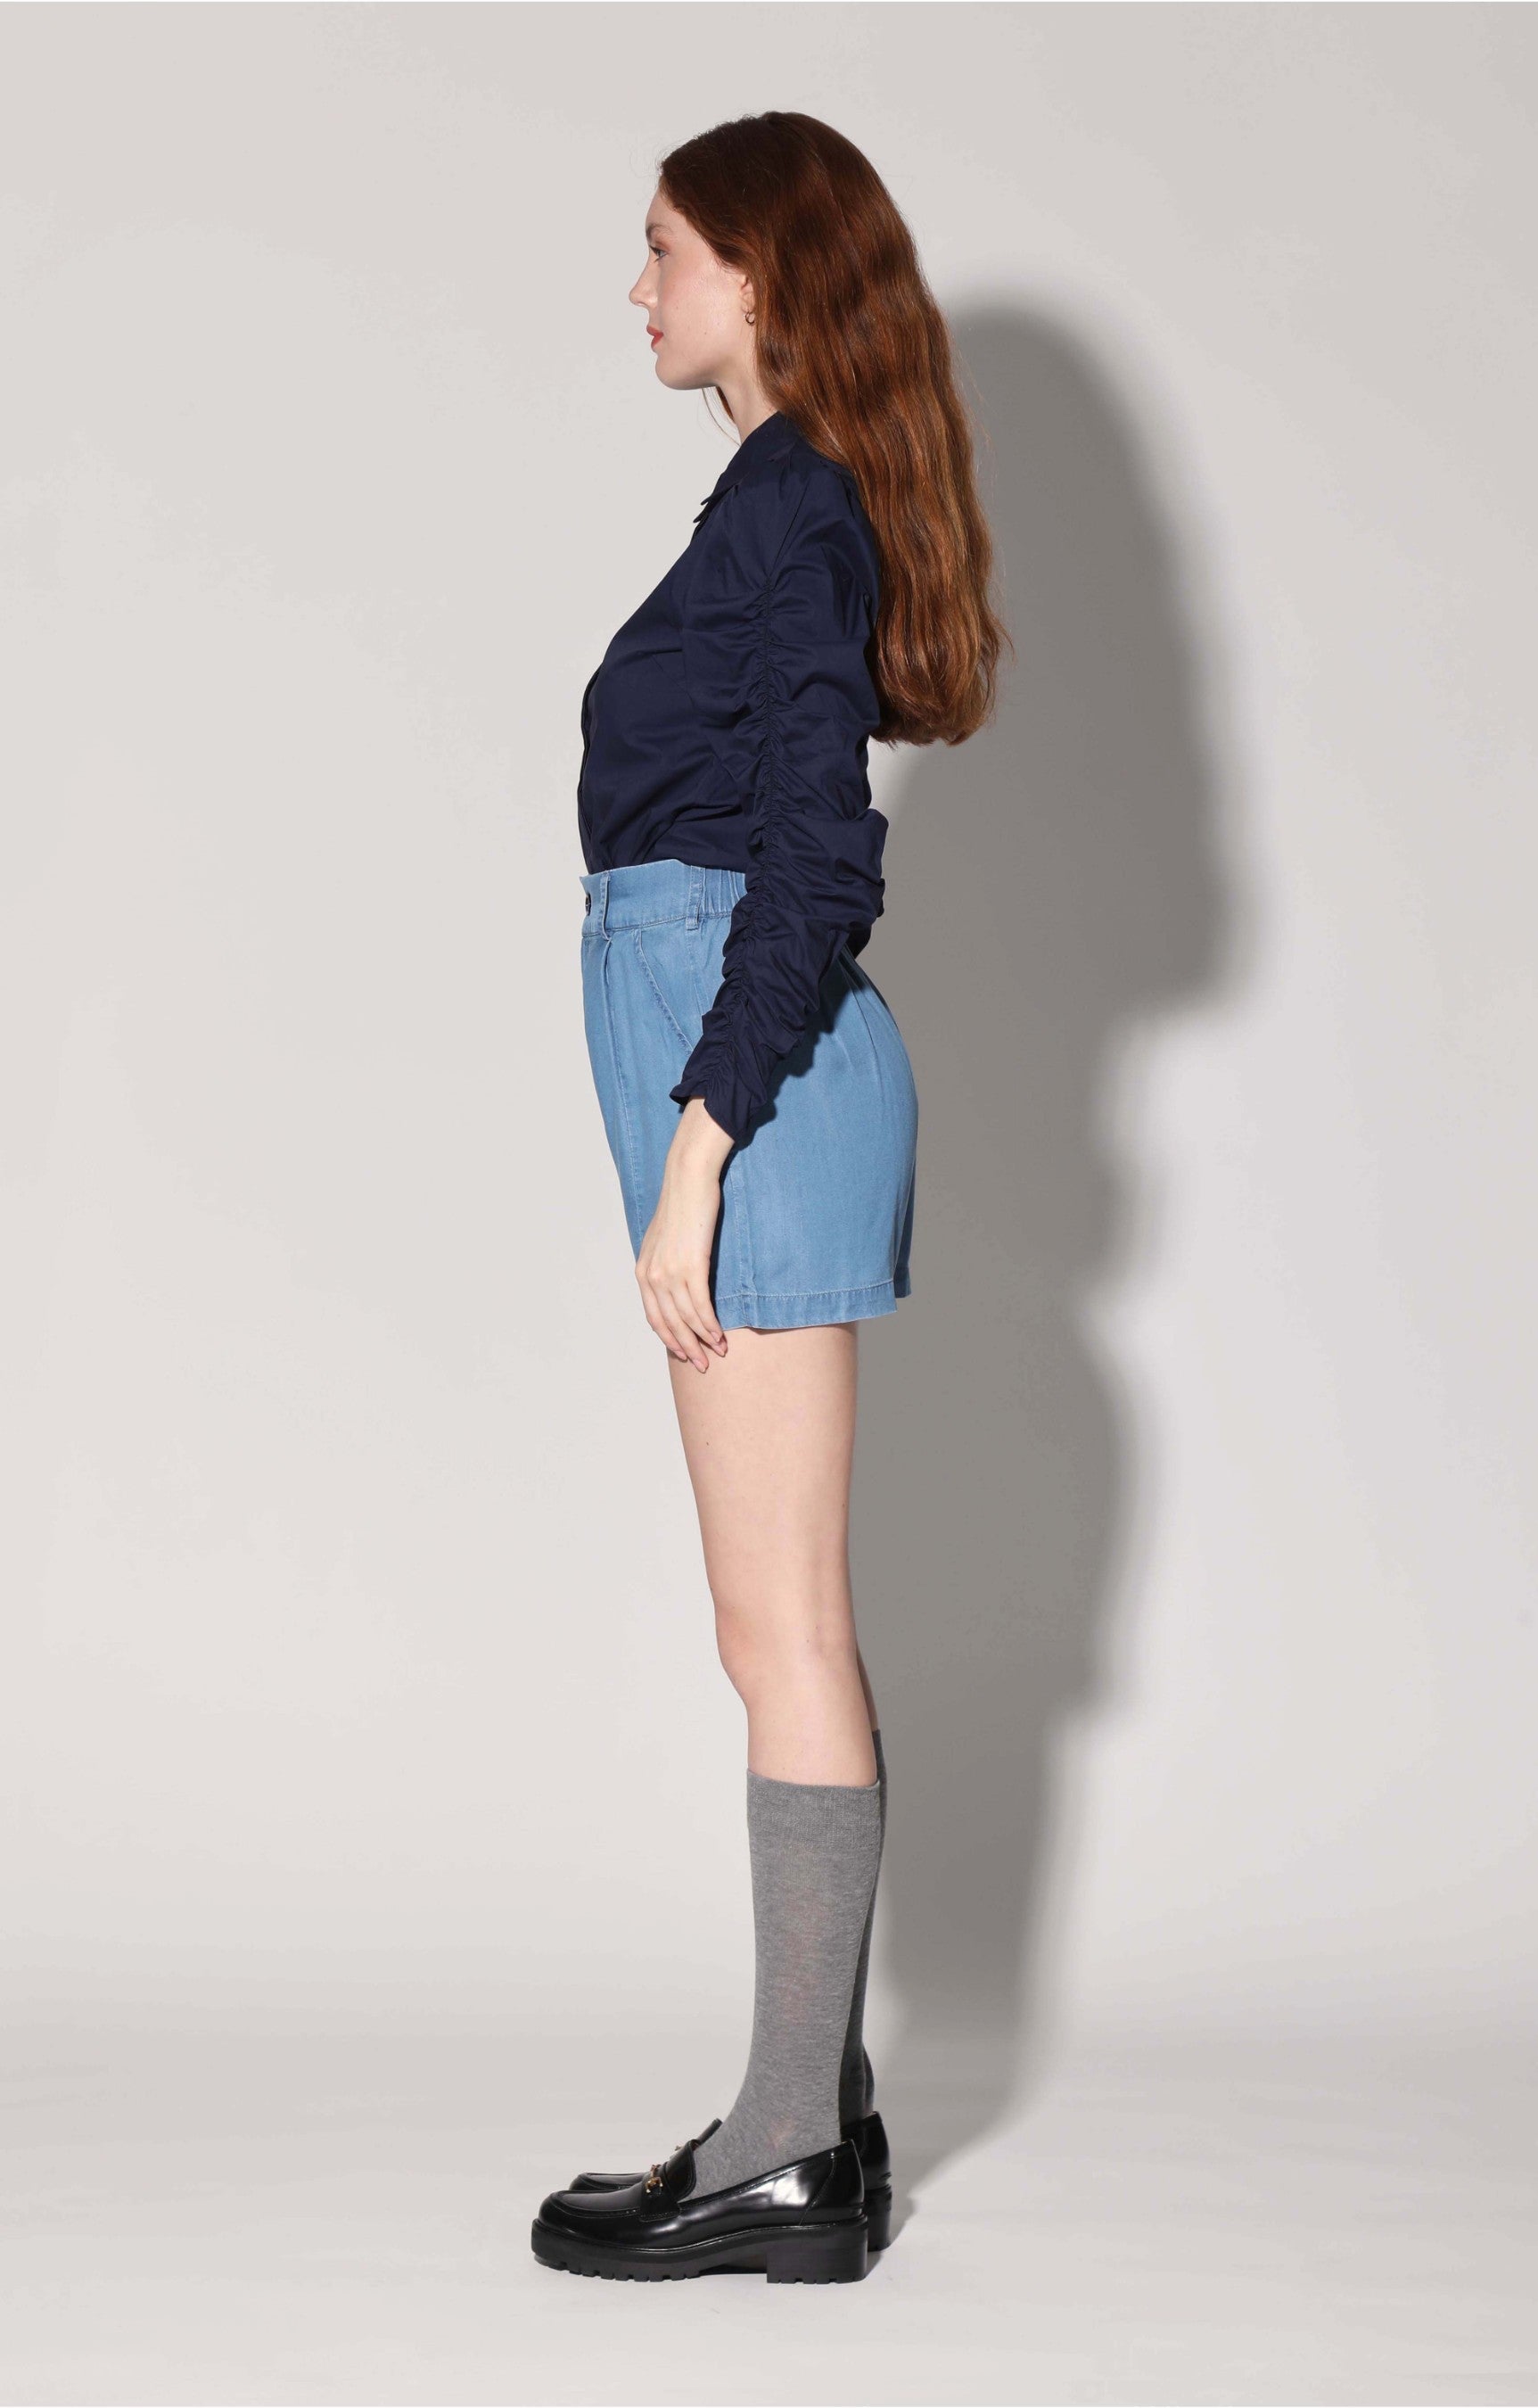 Marcella Top, Navy by Walter Baker